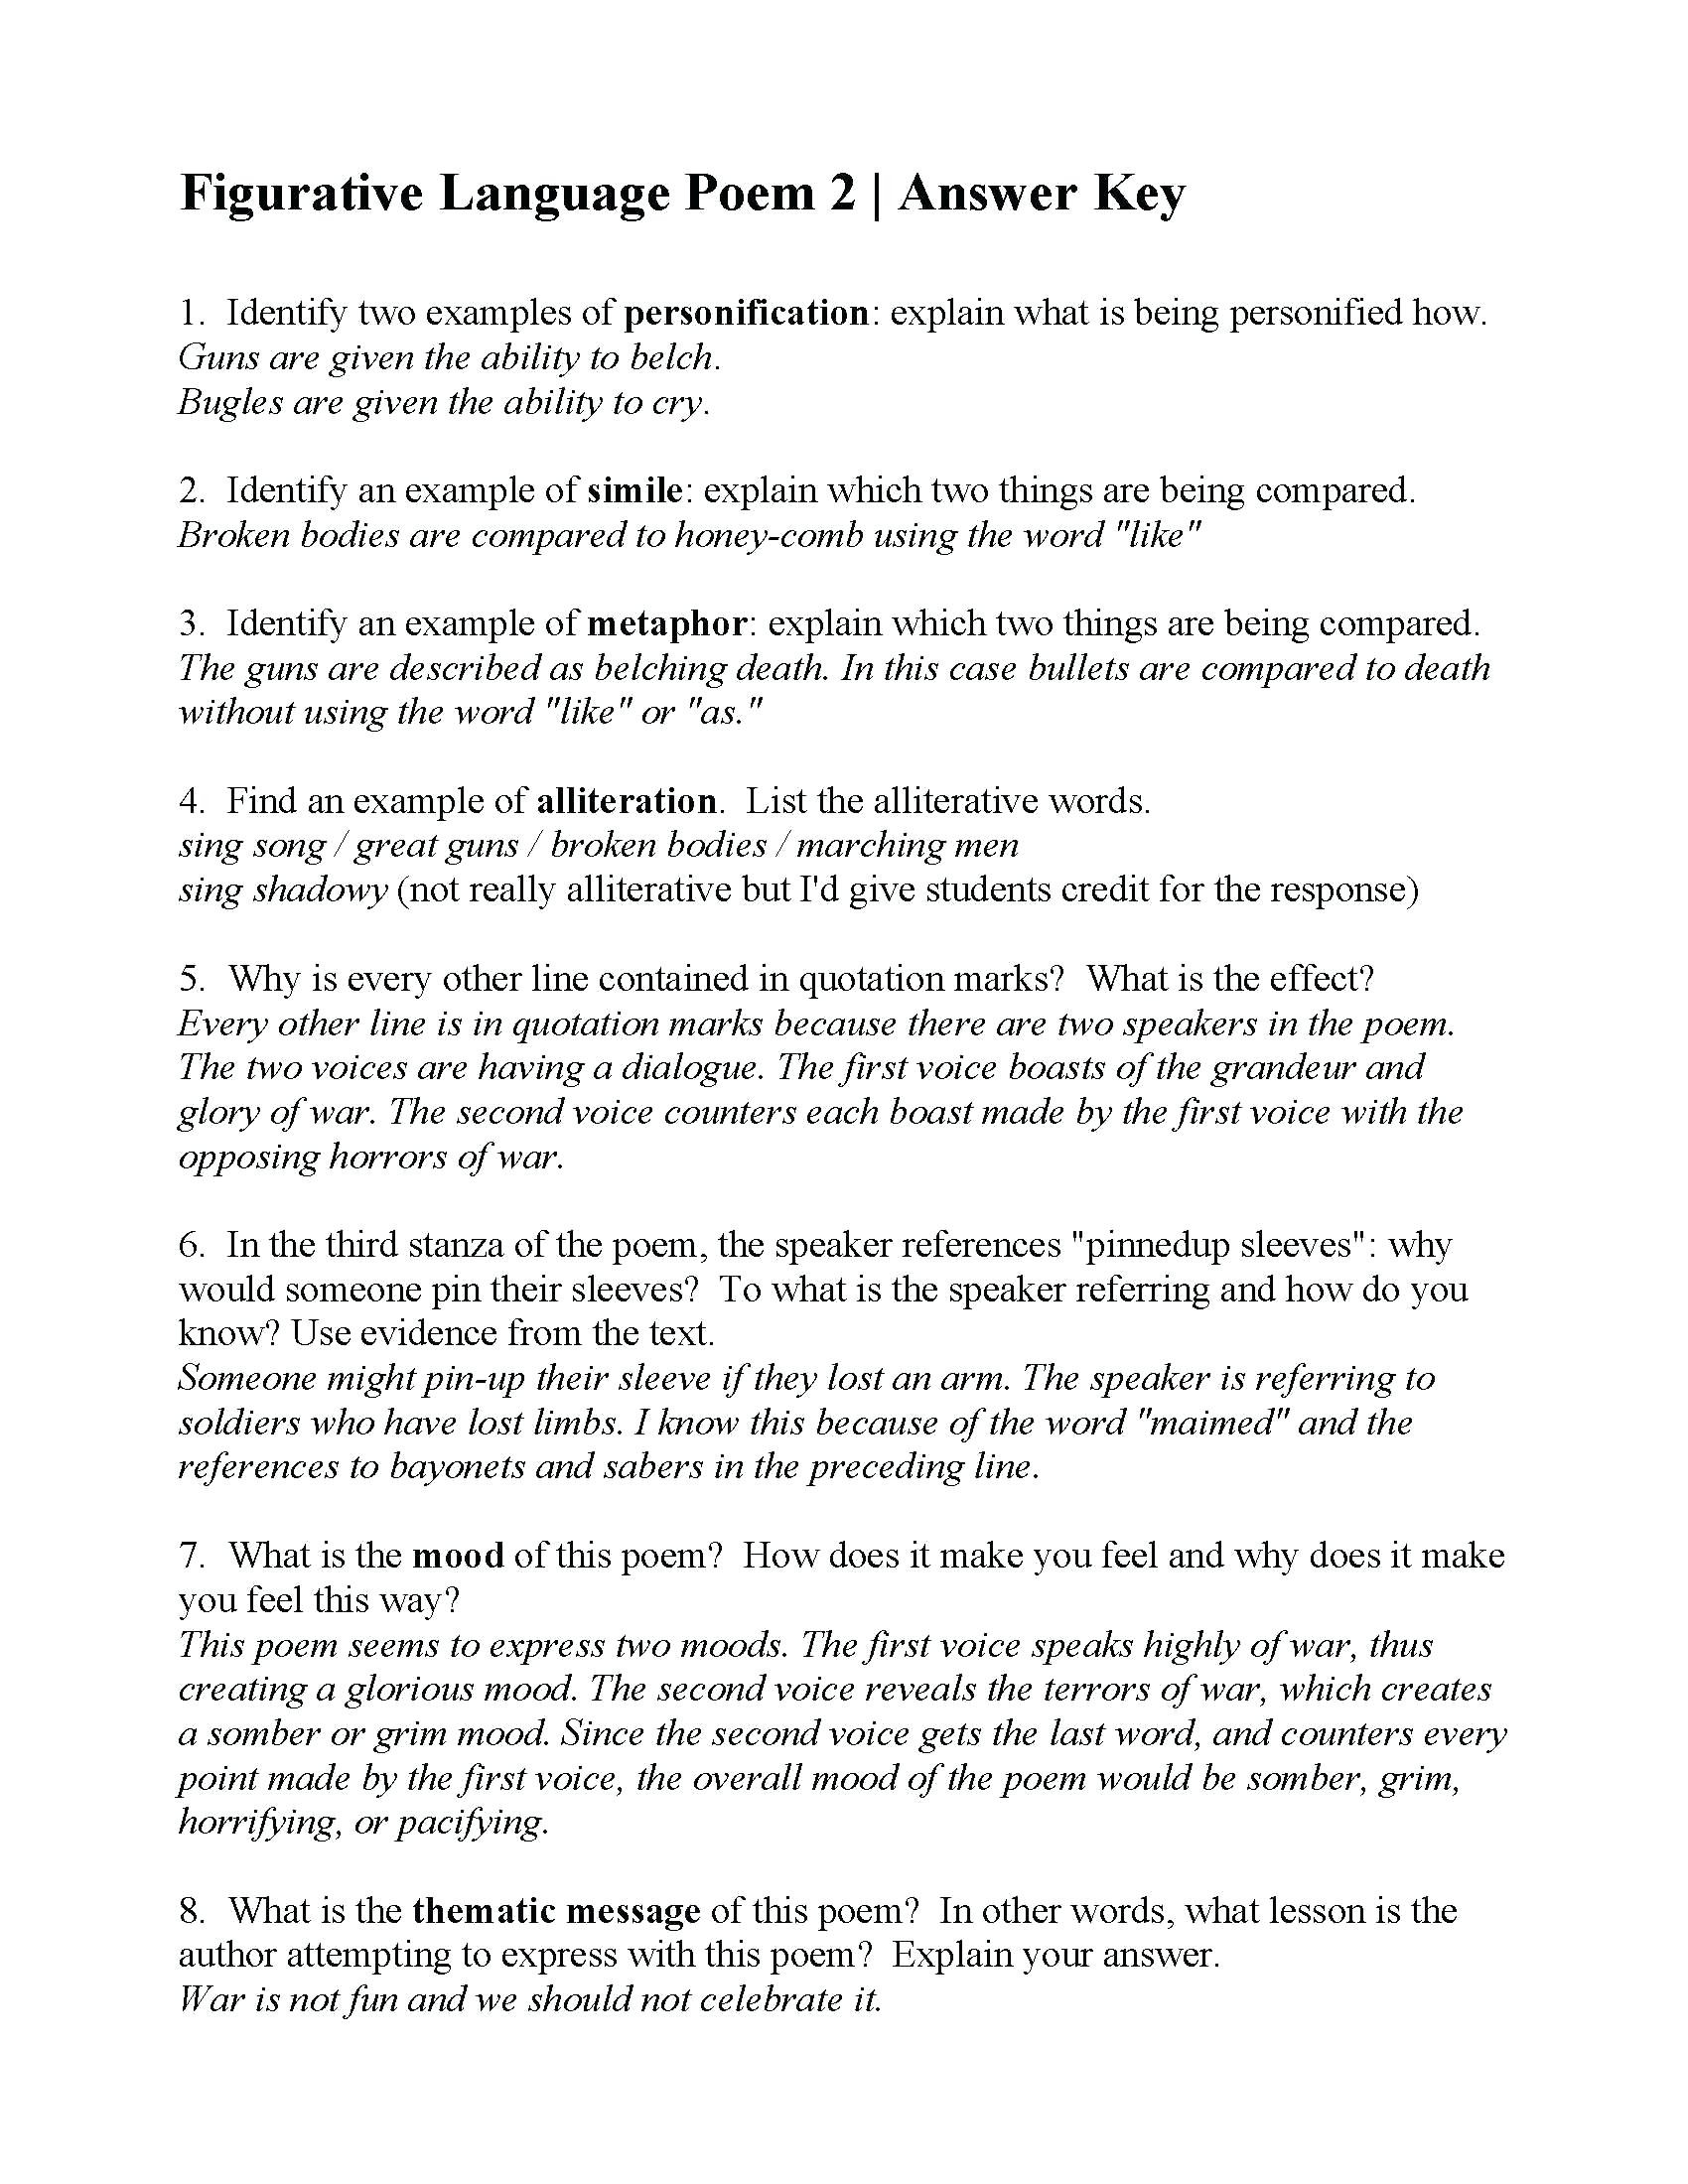 evaluating expressions word problems worksheet page 2 fractions to simile metaphor 5th grade